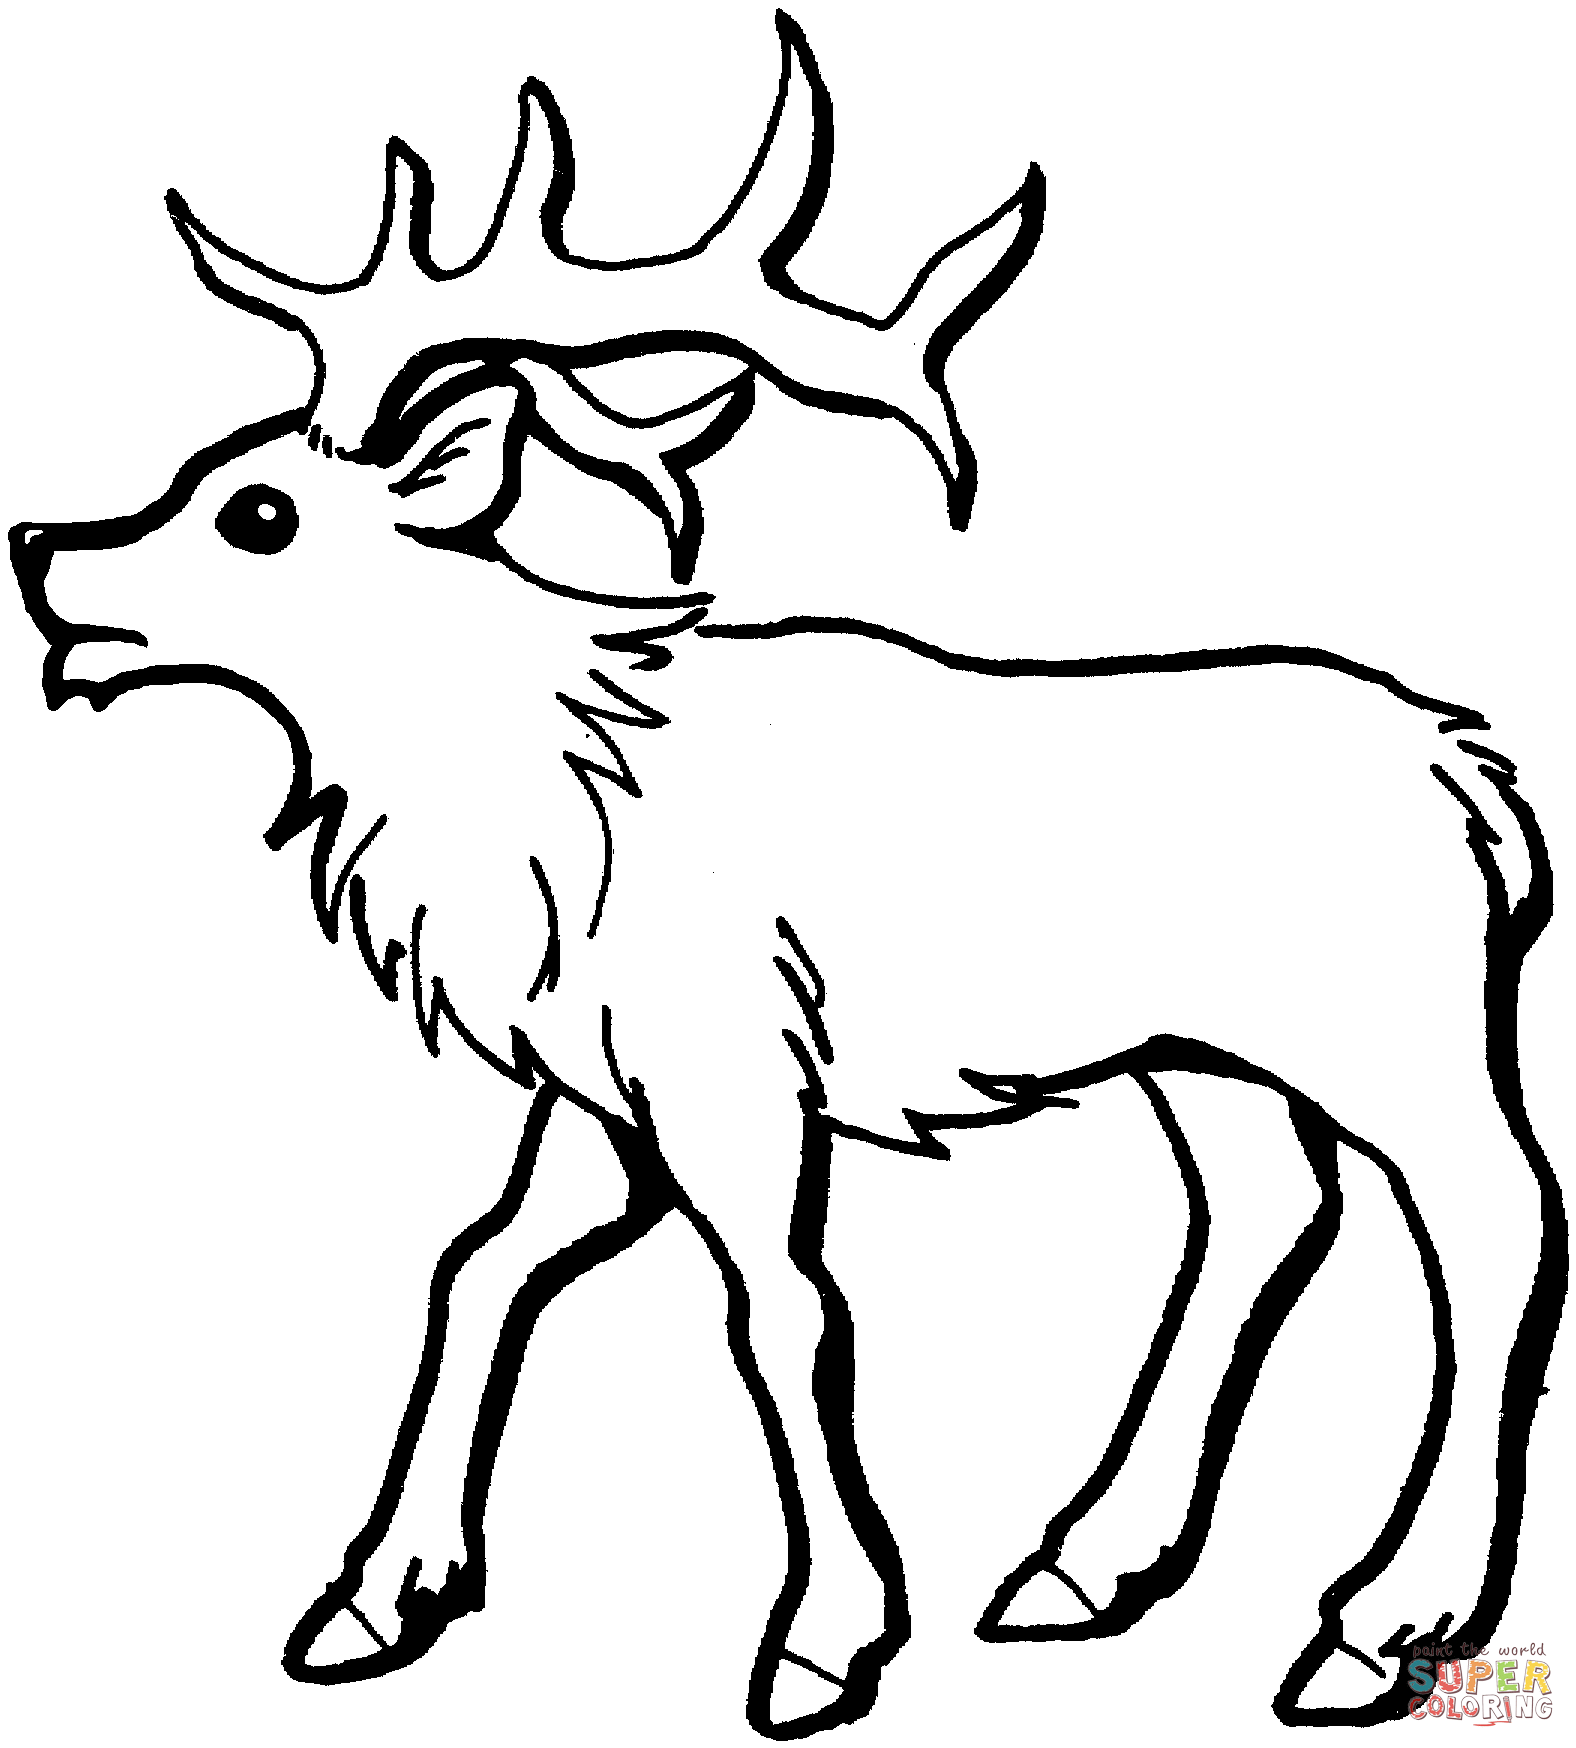 Elk Coloring Pages Elk Coloring Pages Bull Elk Coloring Pages ...